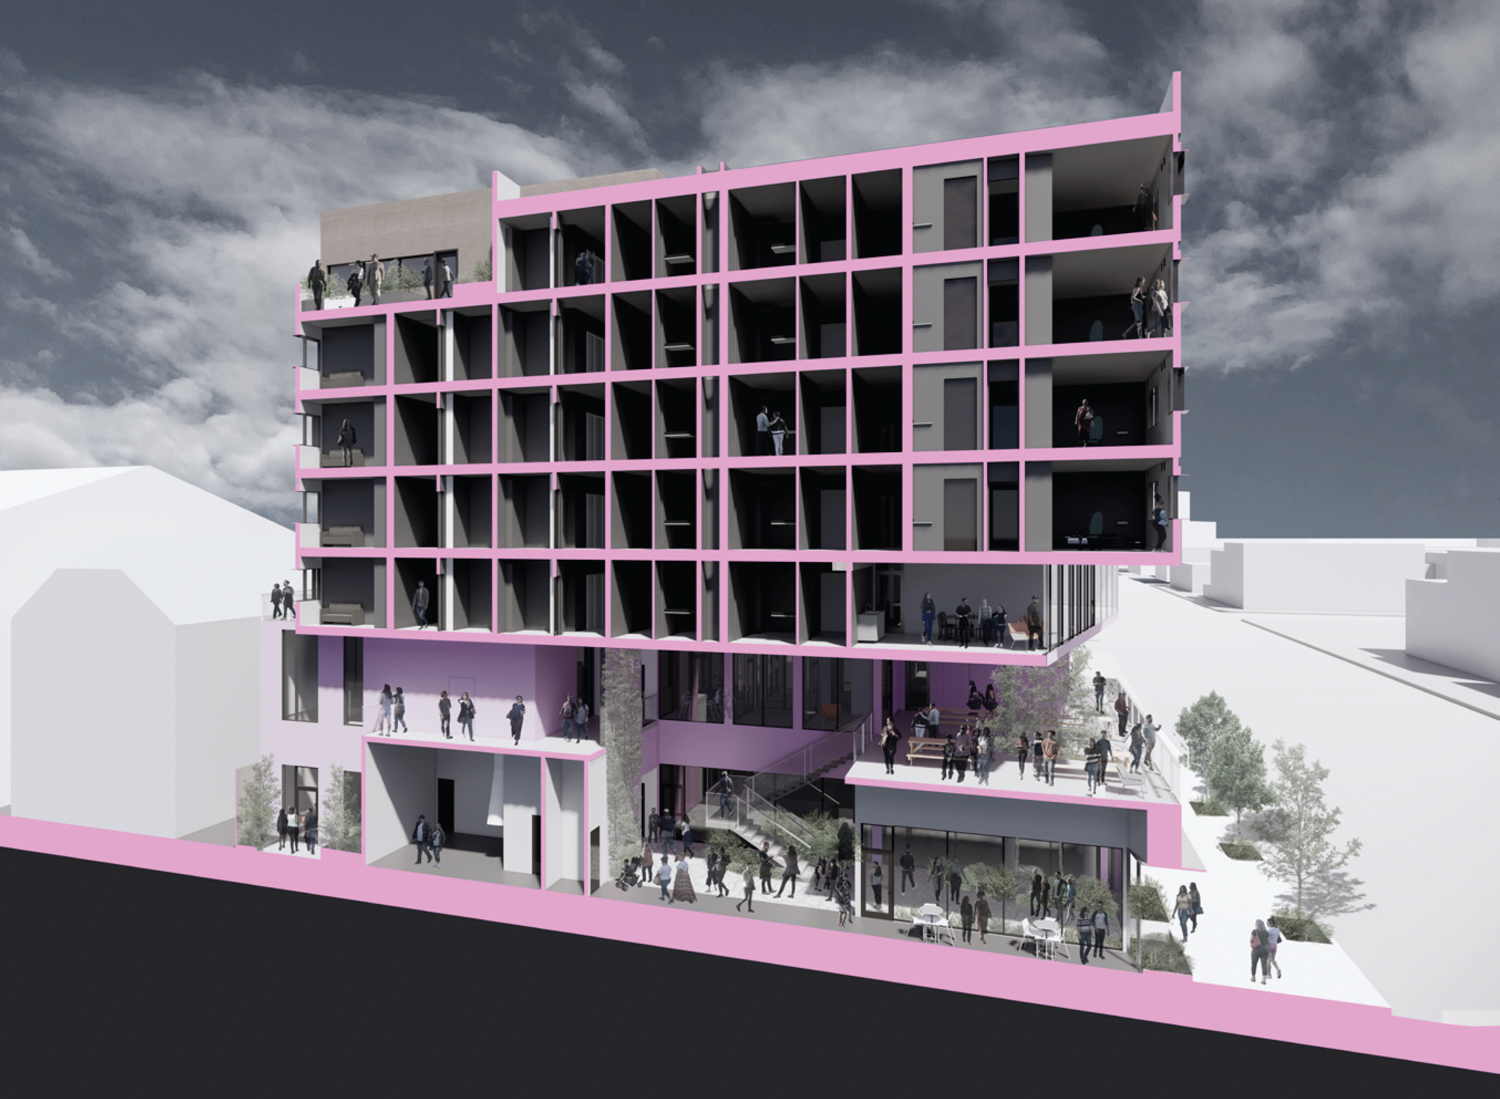 2301 Telegraph Avenue vertical cross-section, design by Mithun and Parcel Projects